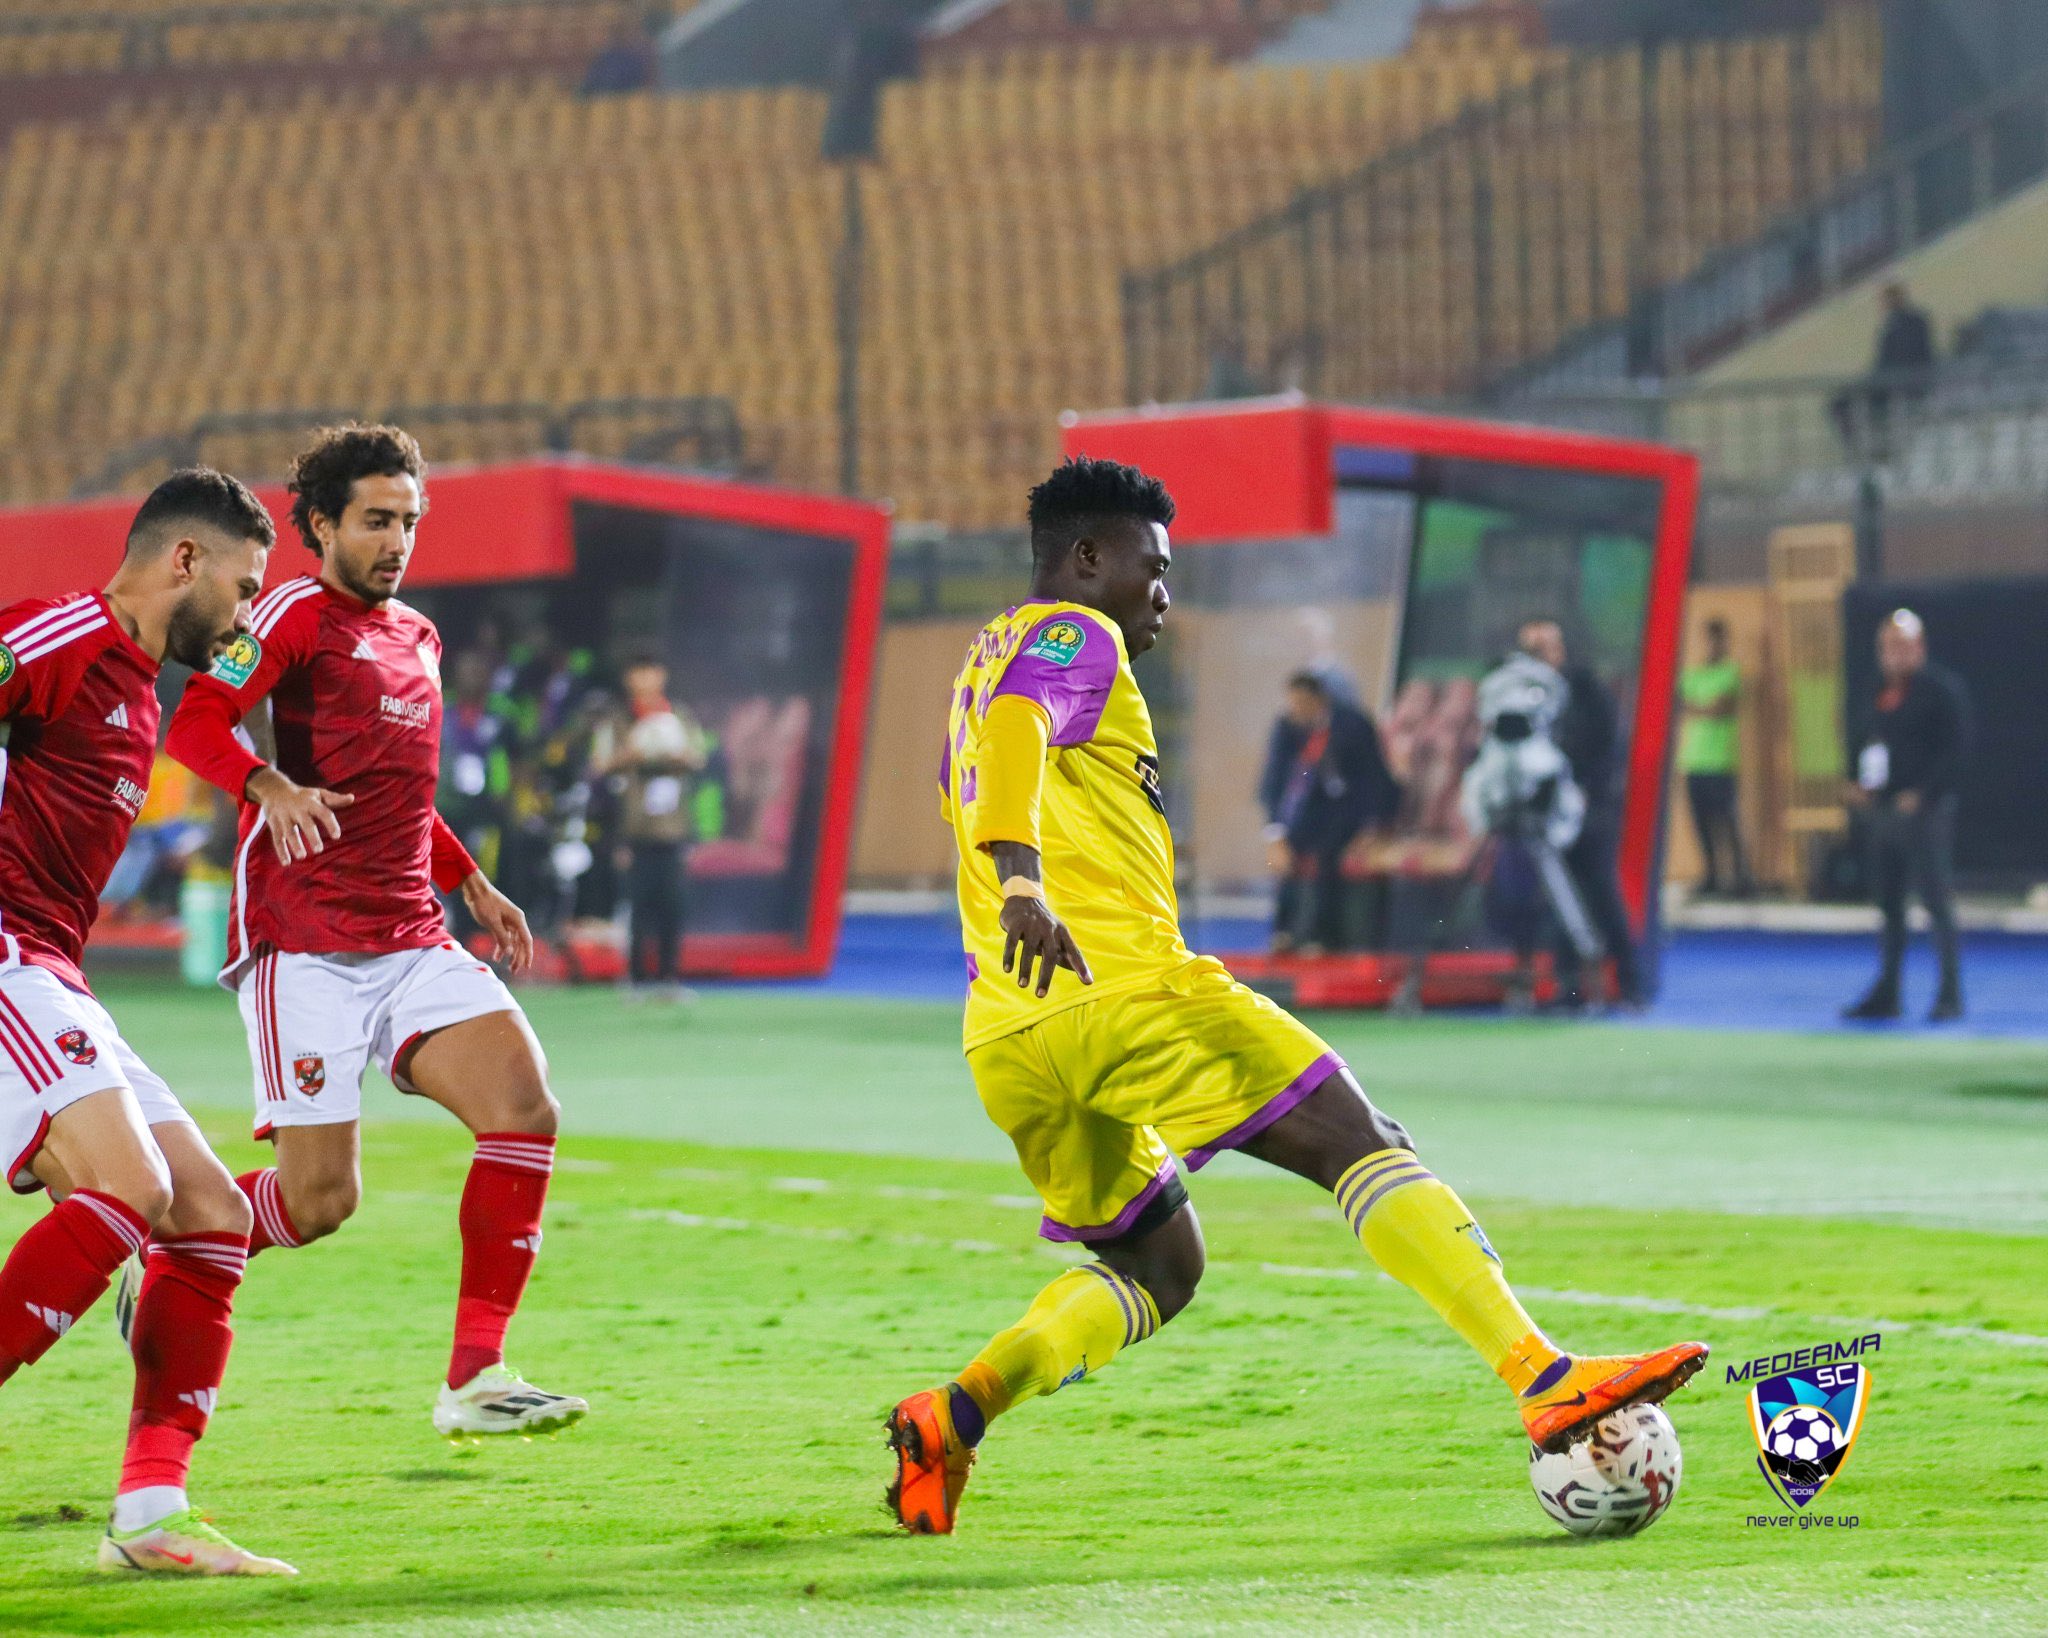 VIDEO: Watch highlights of Medeama’s 3-0 defeat to Al Ahly